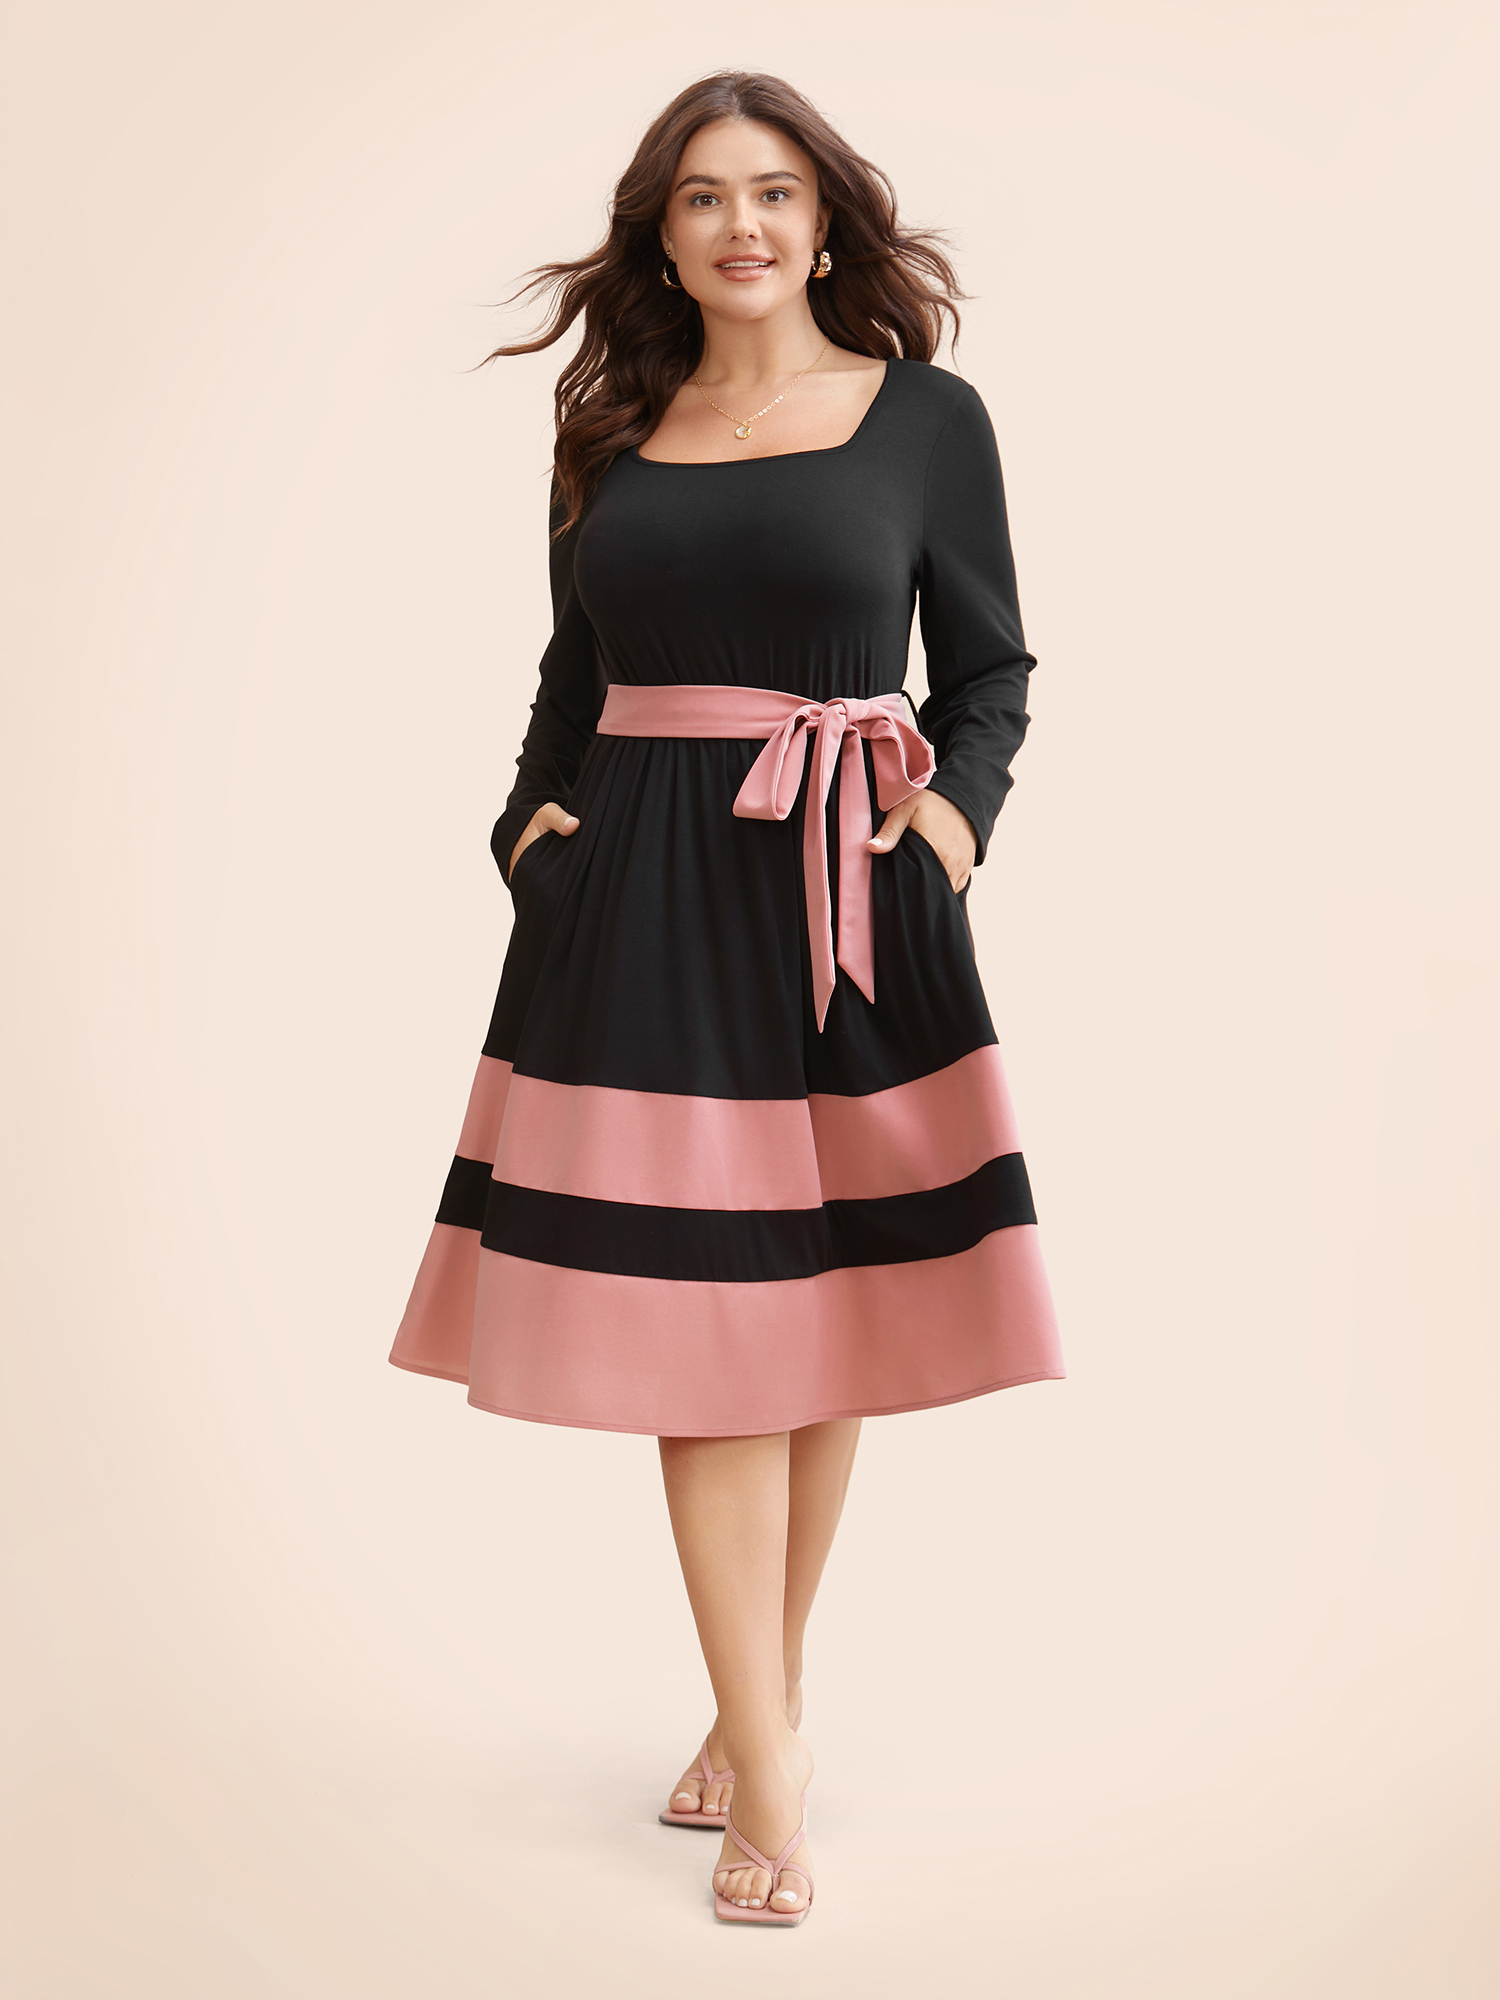 

Plus Size Two Tone Belted Bowknot Square Neck Dress Black Women Elegant Non Square Neck Long Sleeve Curvy Knee Dress BloomChic